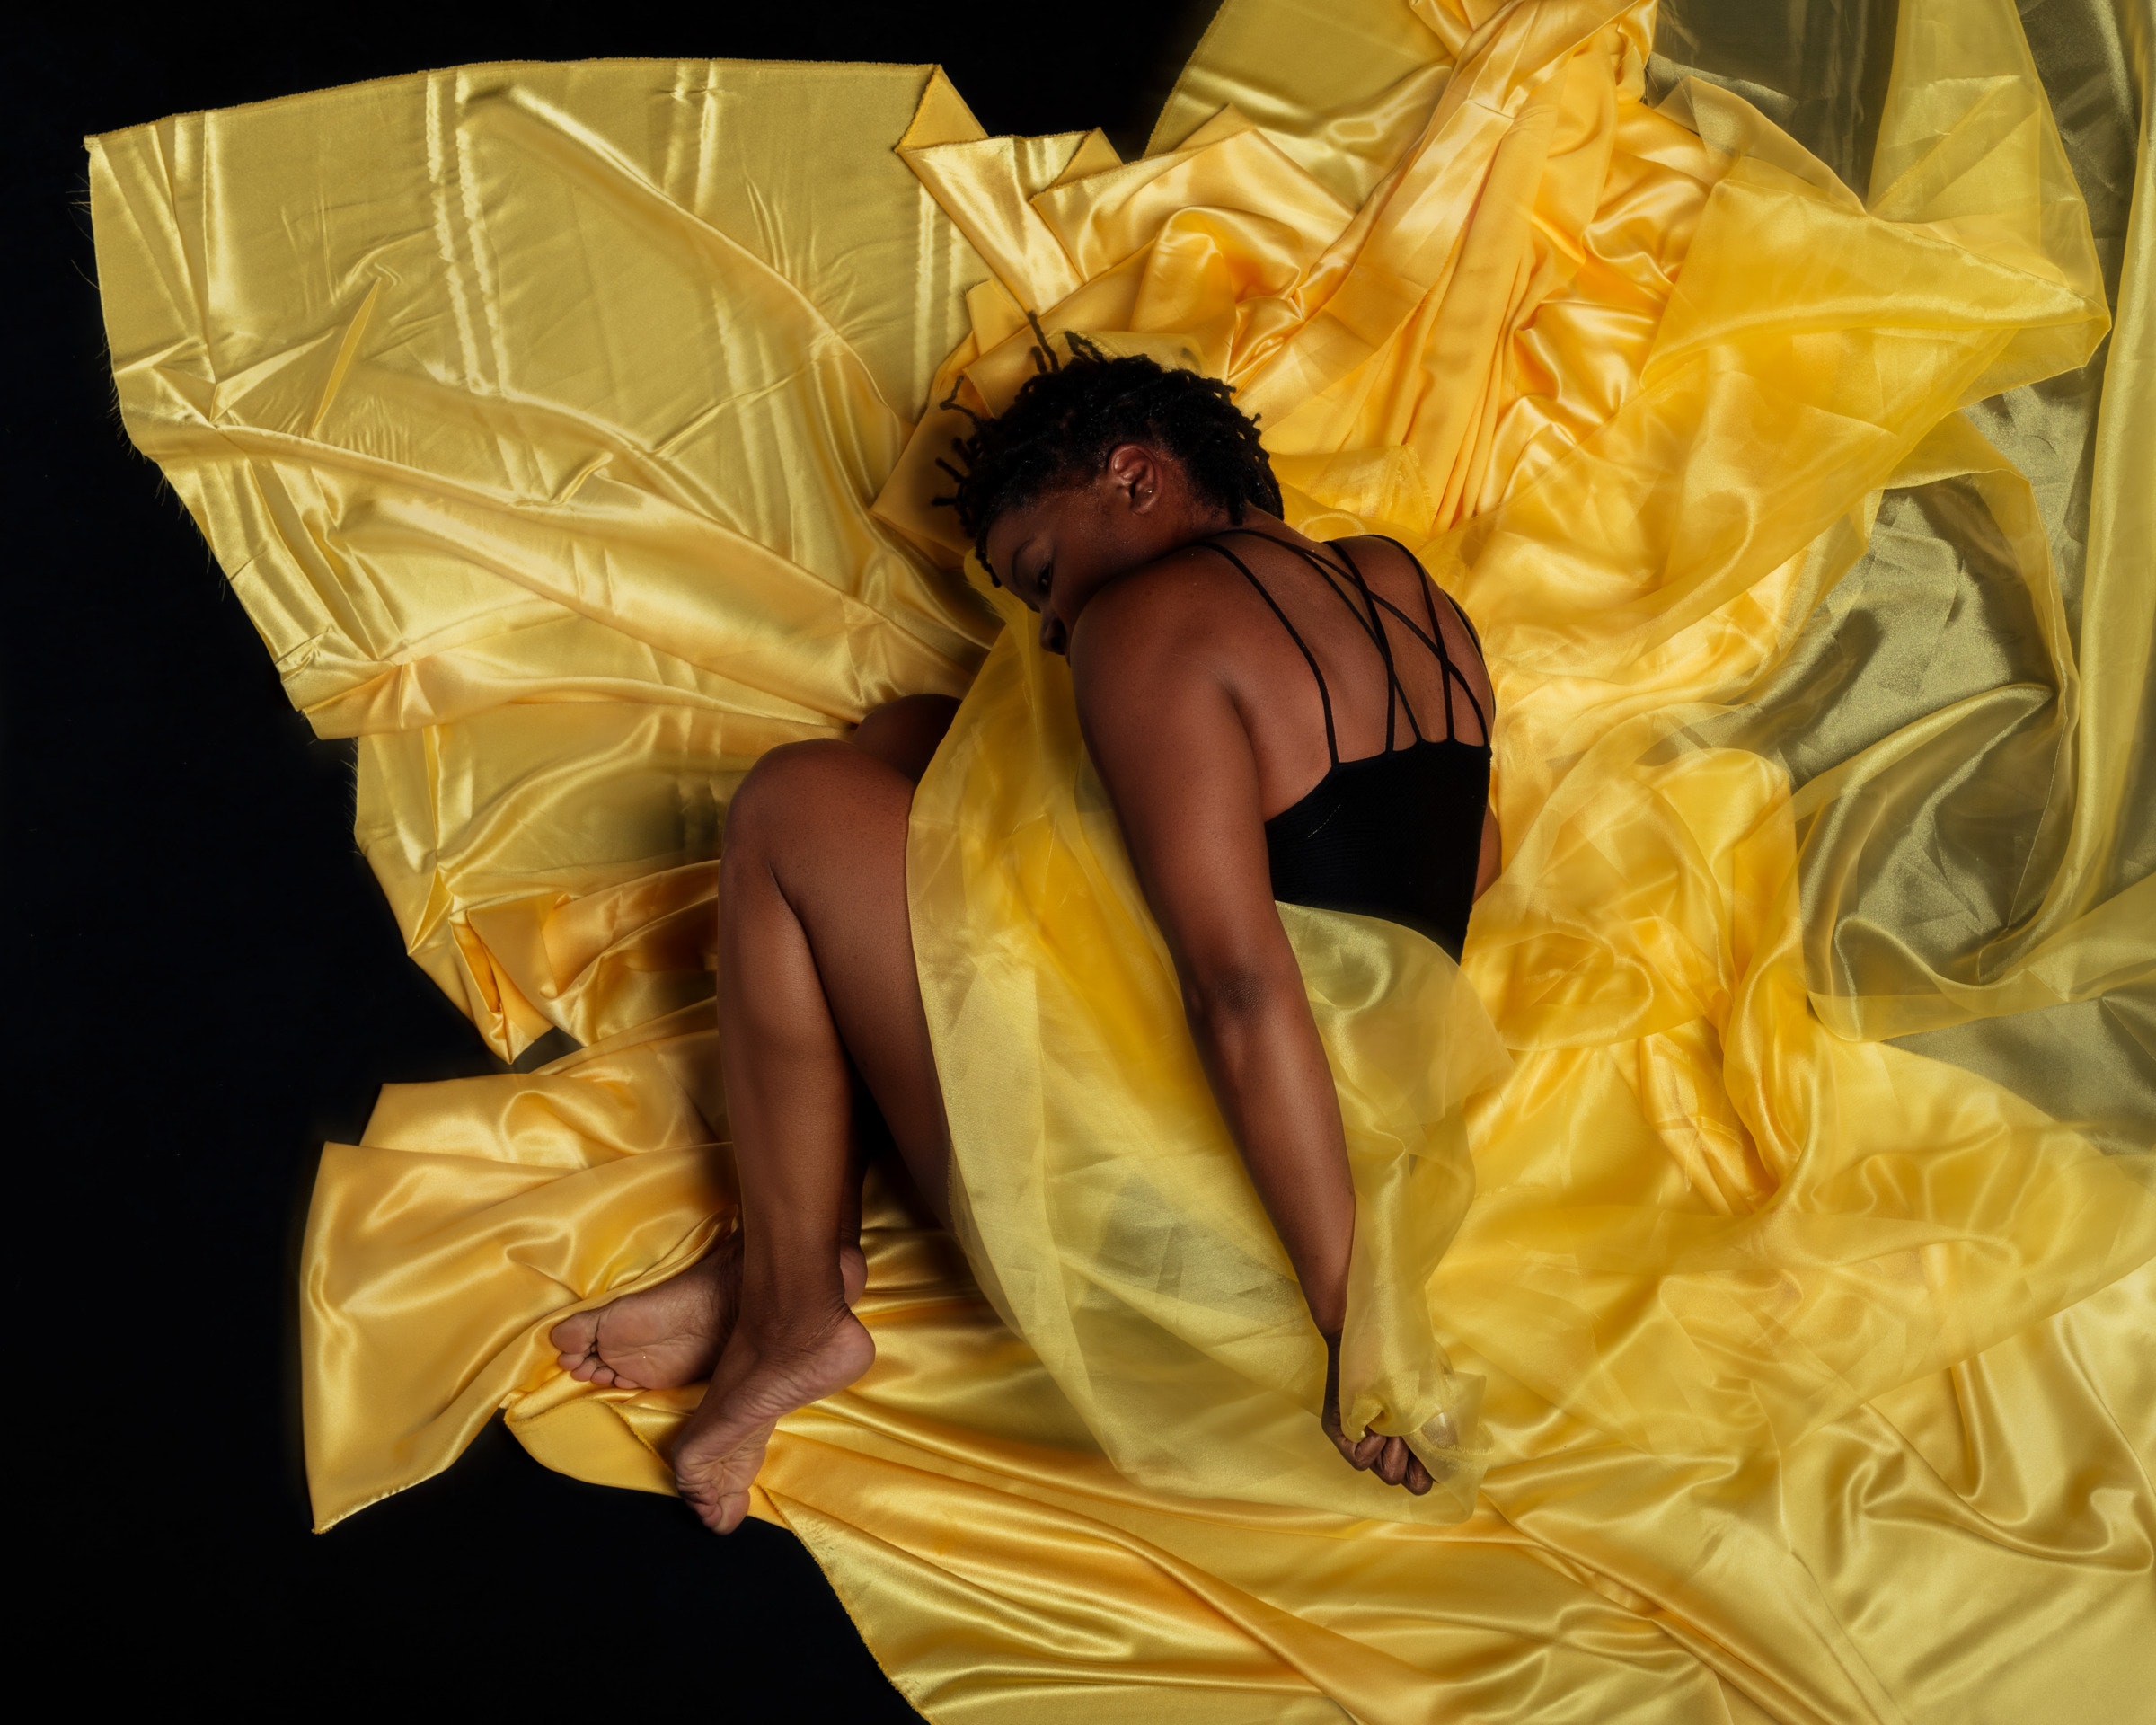 A woman lies curled up in lots of sheer yellow fabirc.